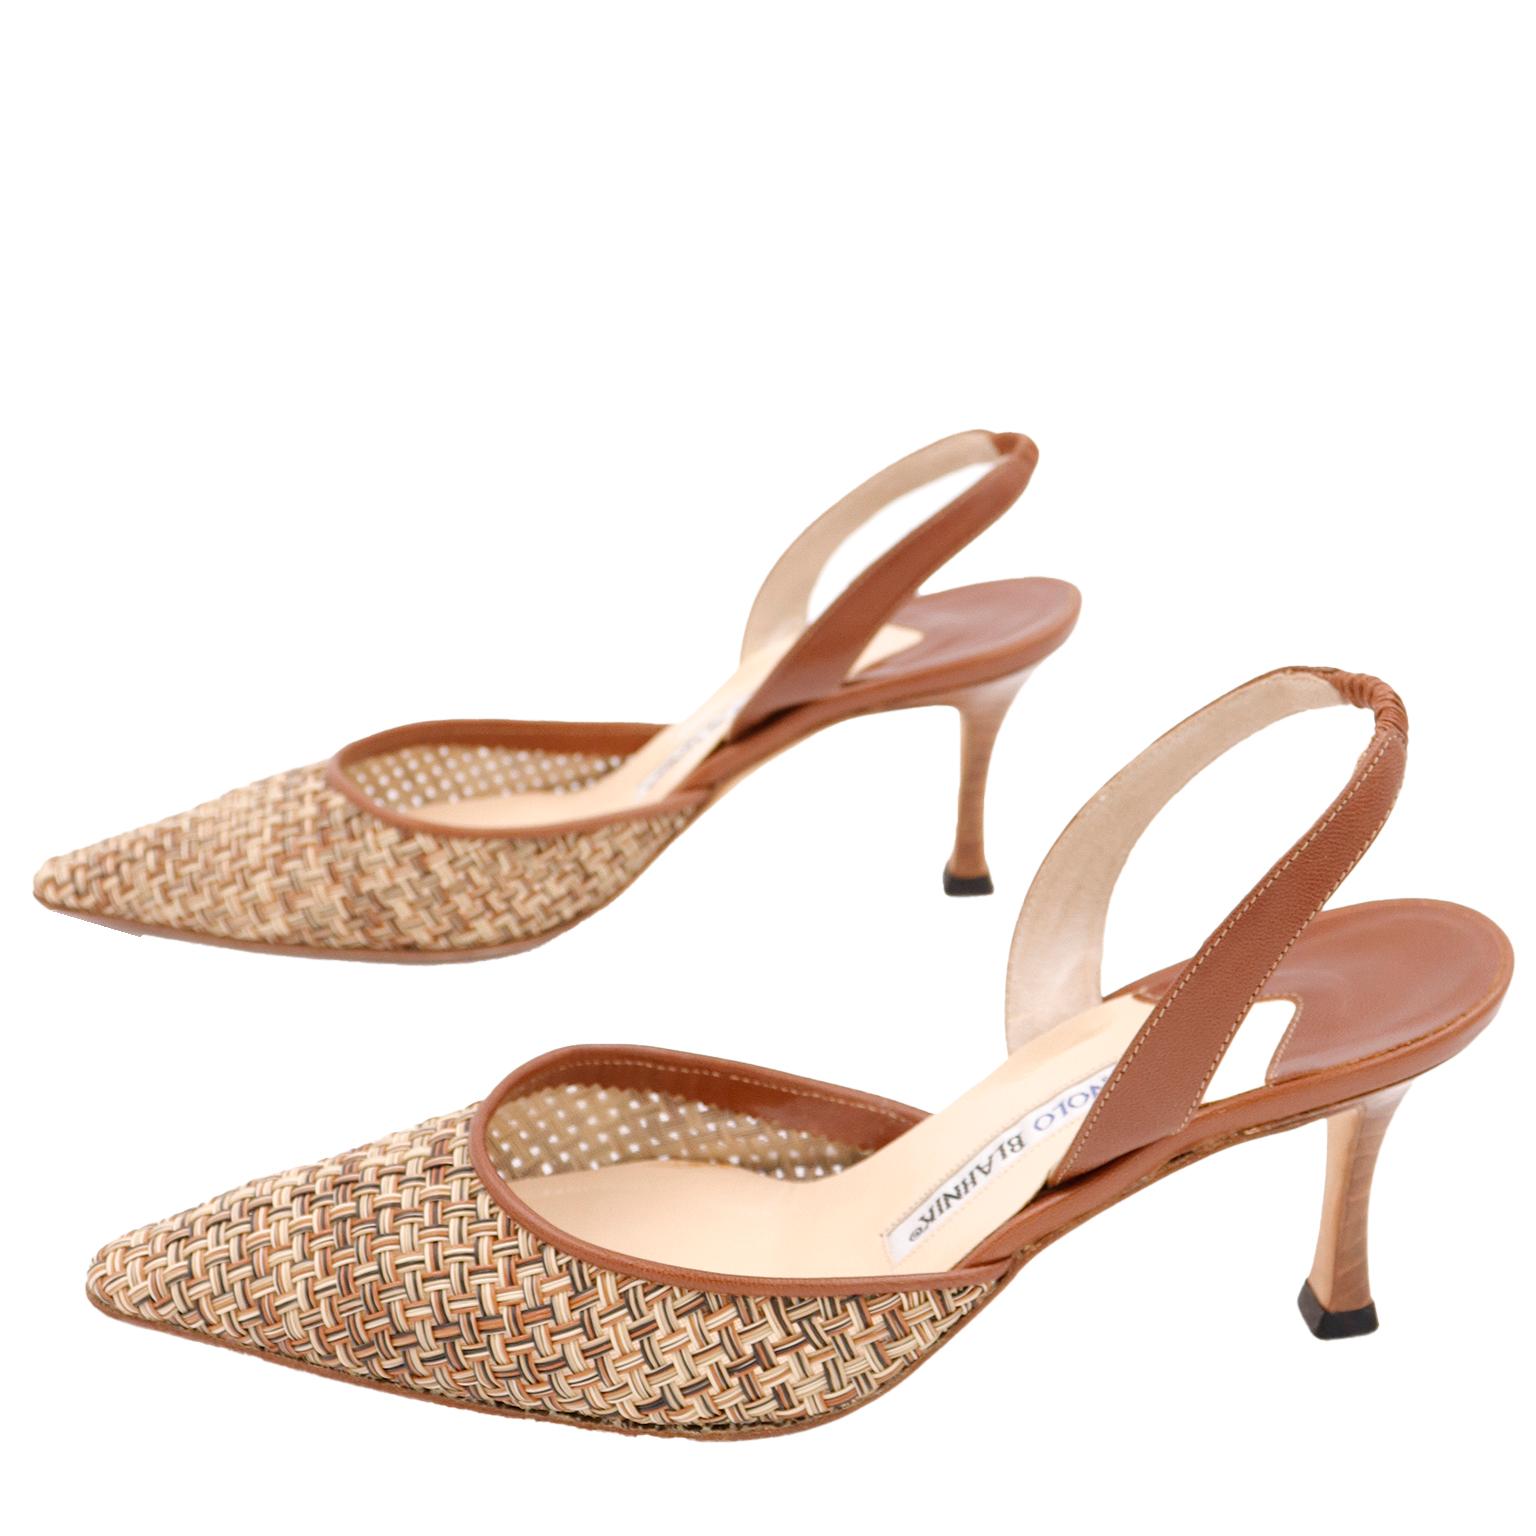 Women's Manolo Blahnik Woven Leather Carolyne Slingback Shoes With Original Box and Bag